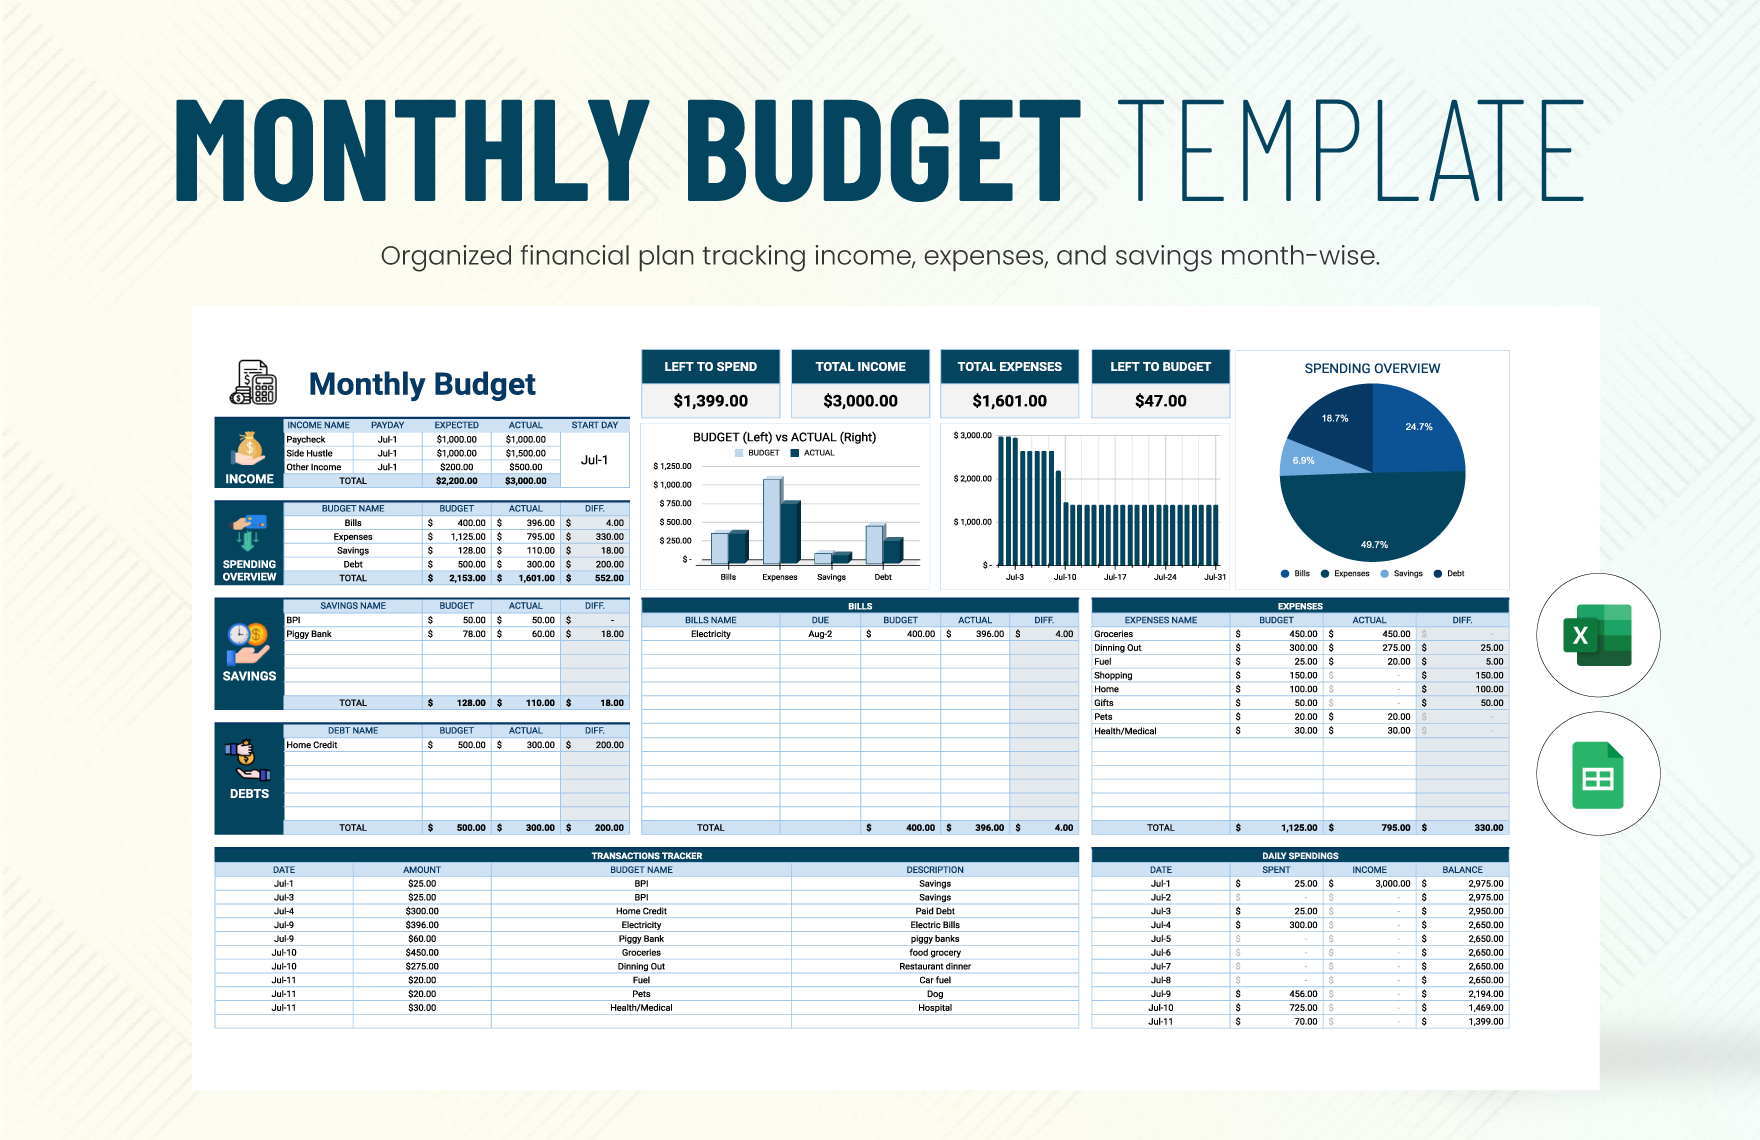 Monthly Budget Templates